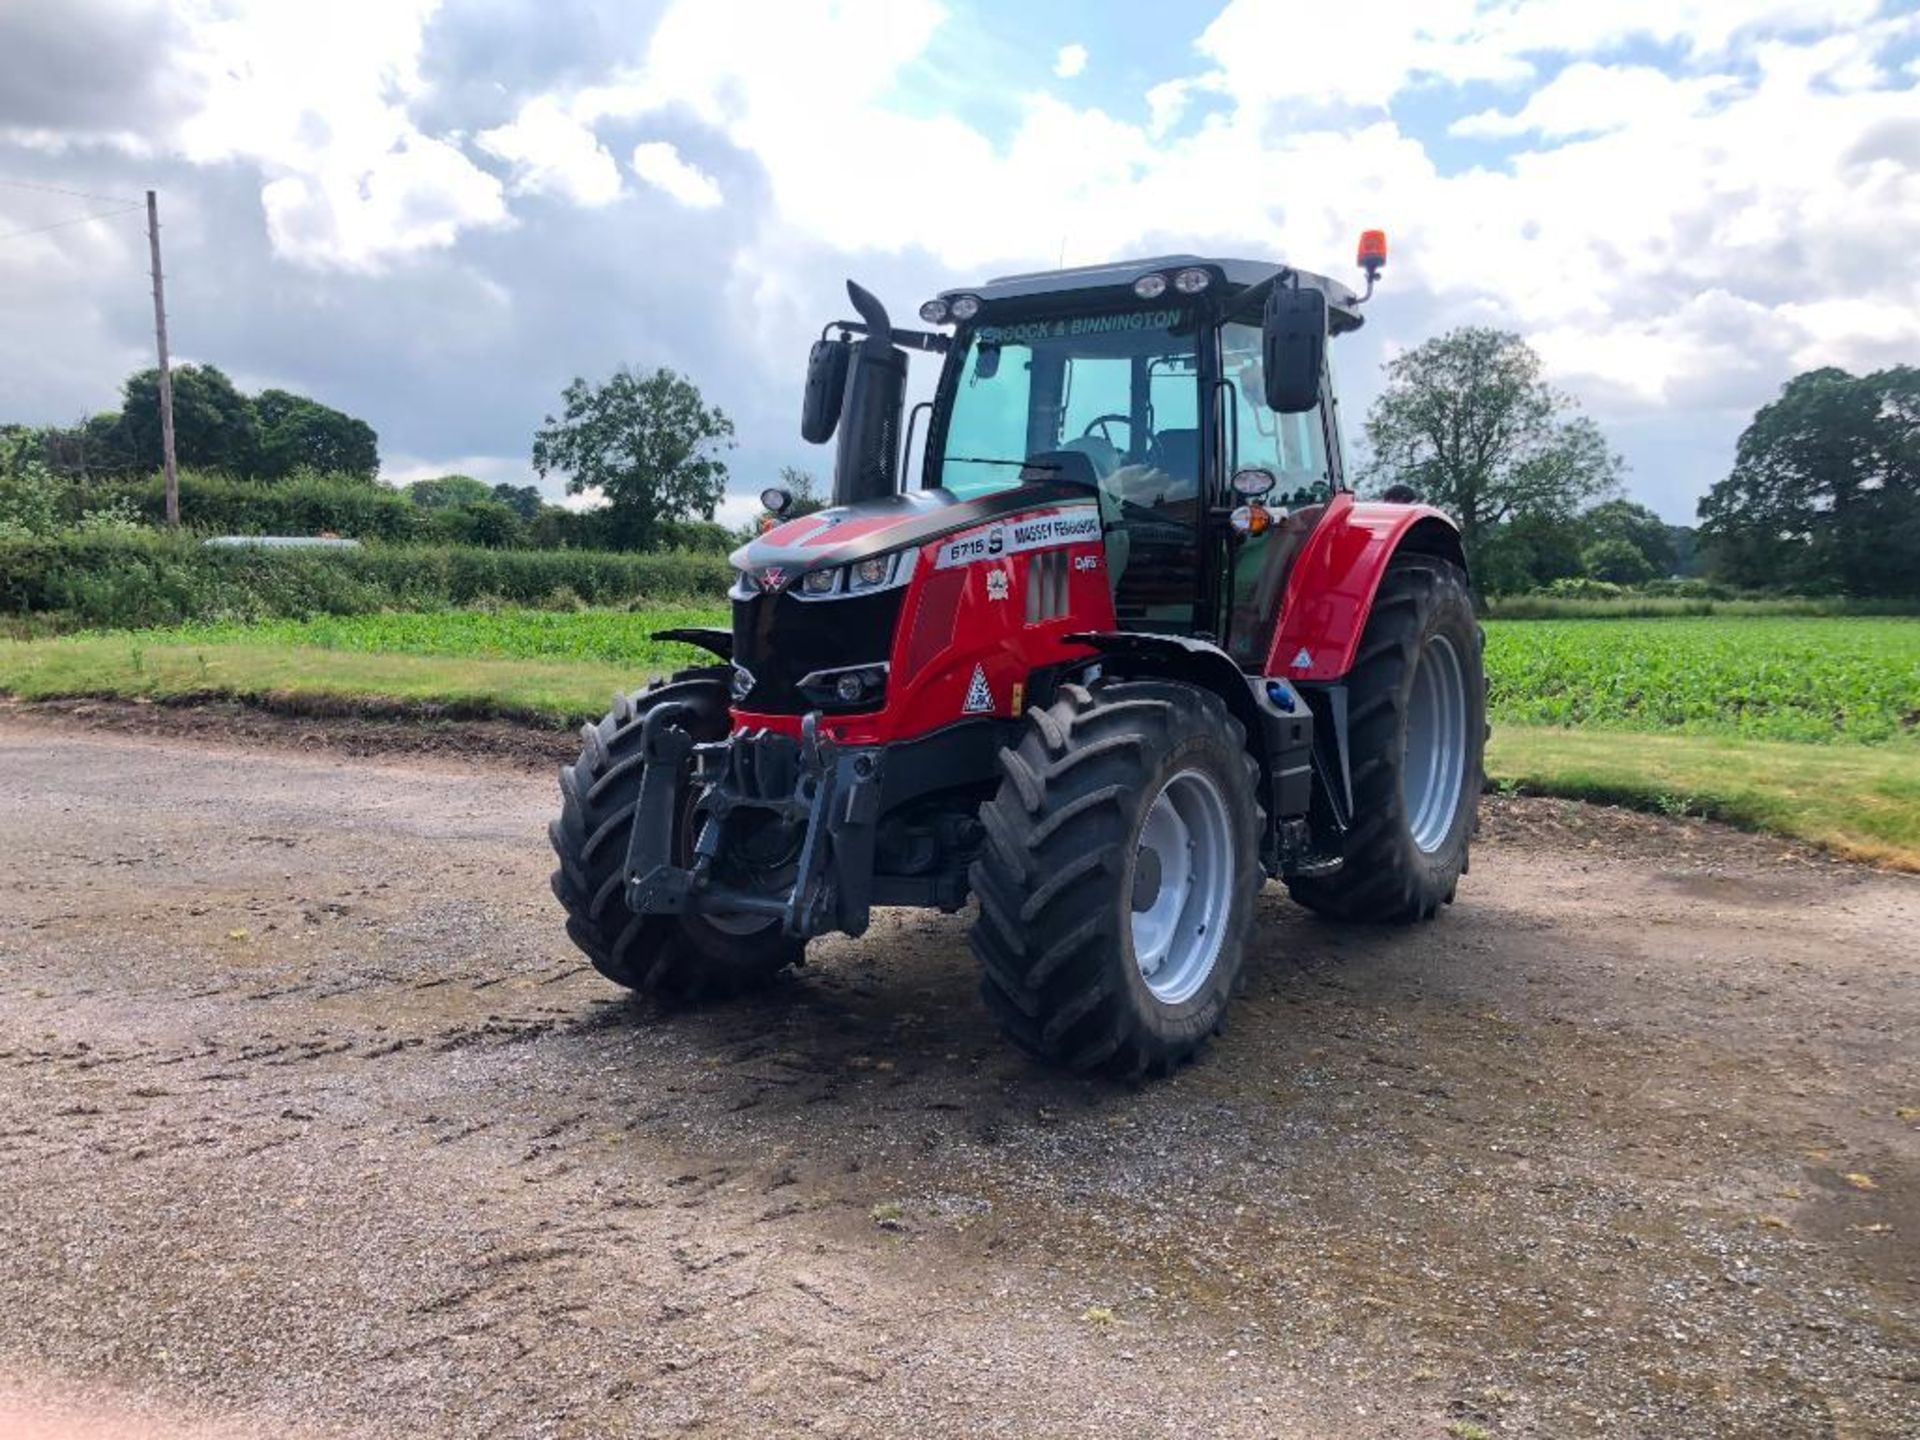 2019 Massey Ferguson 6715 S Dyna 6 50kph 4wd tractor c/w 3 manual spools, front linkage, air brakes, - Image 23 of 41